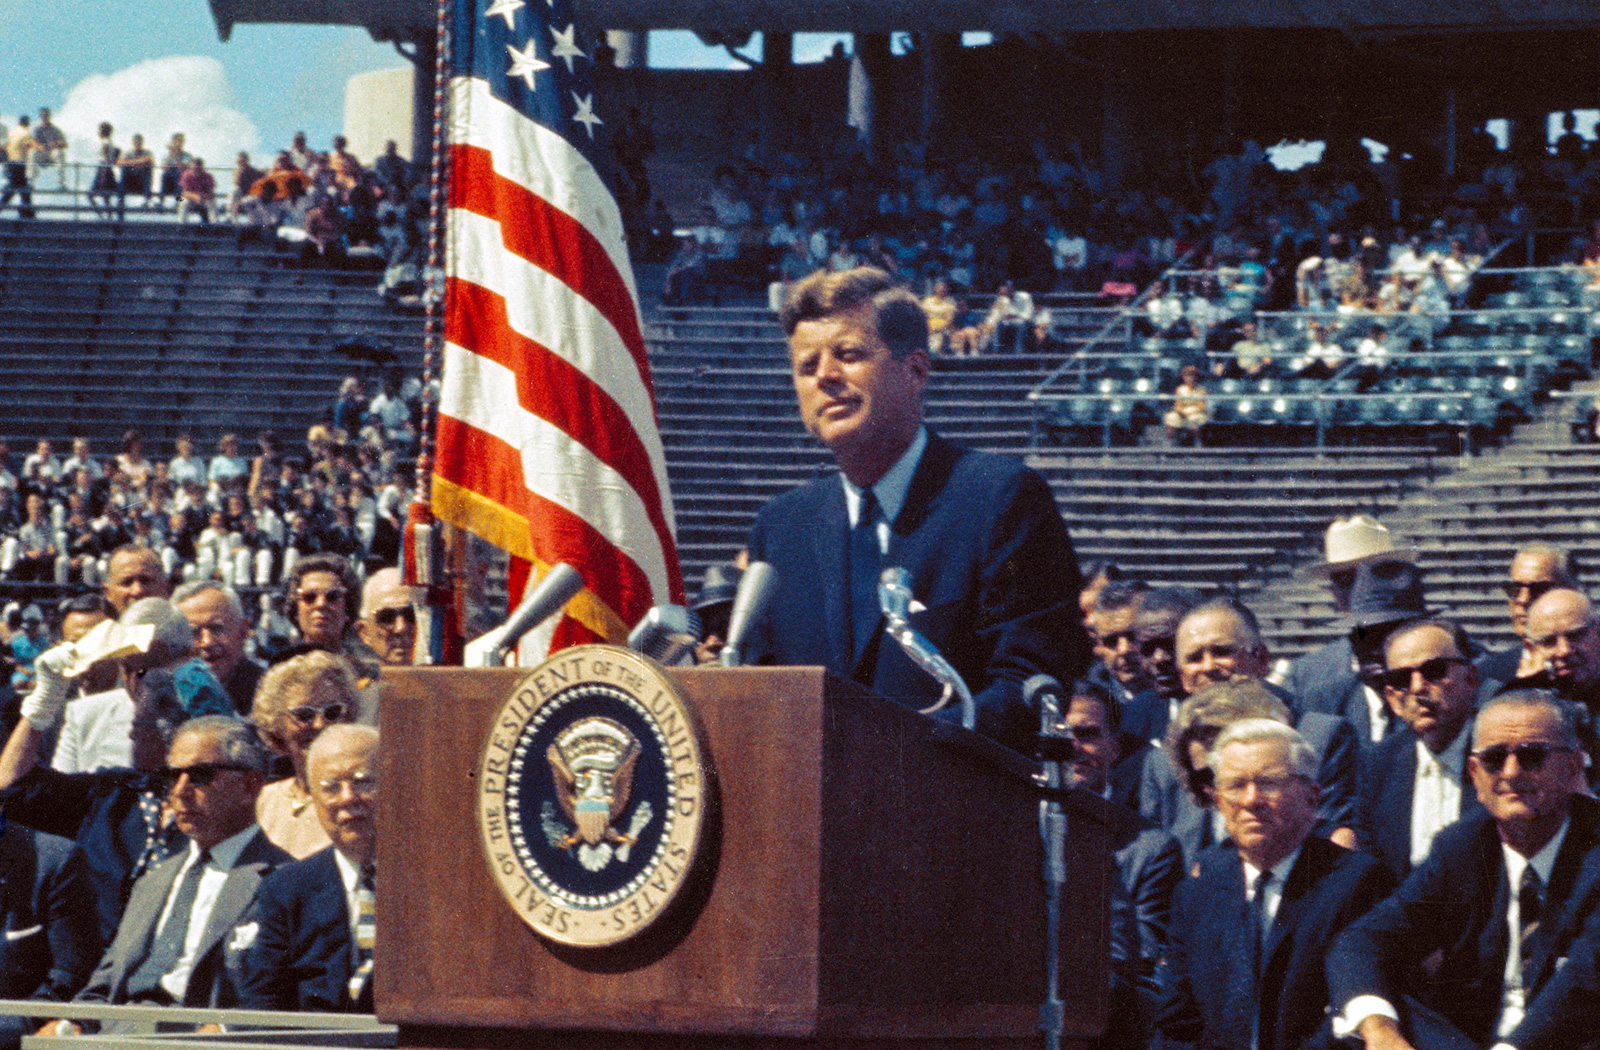 President Kennedy speaking at Rice